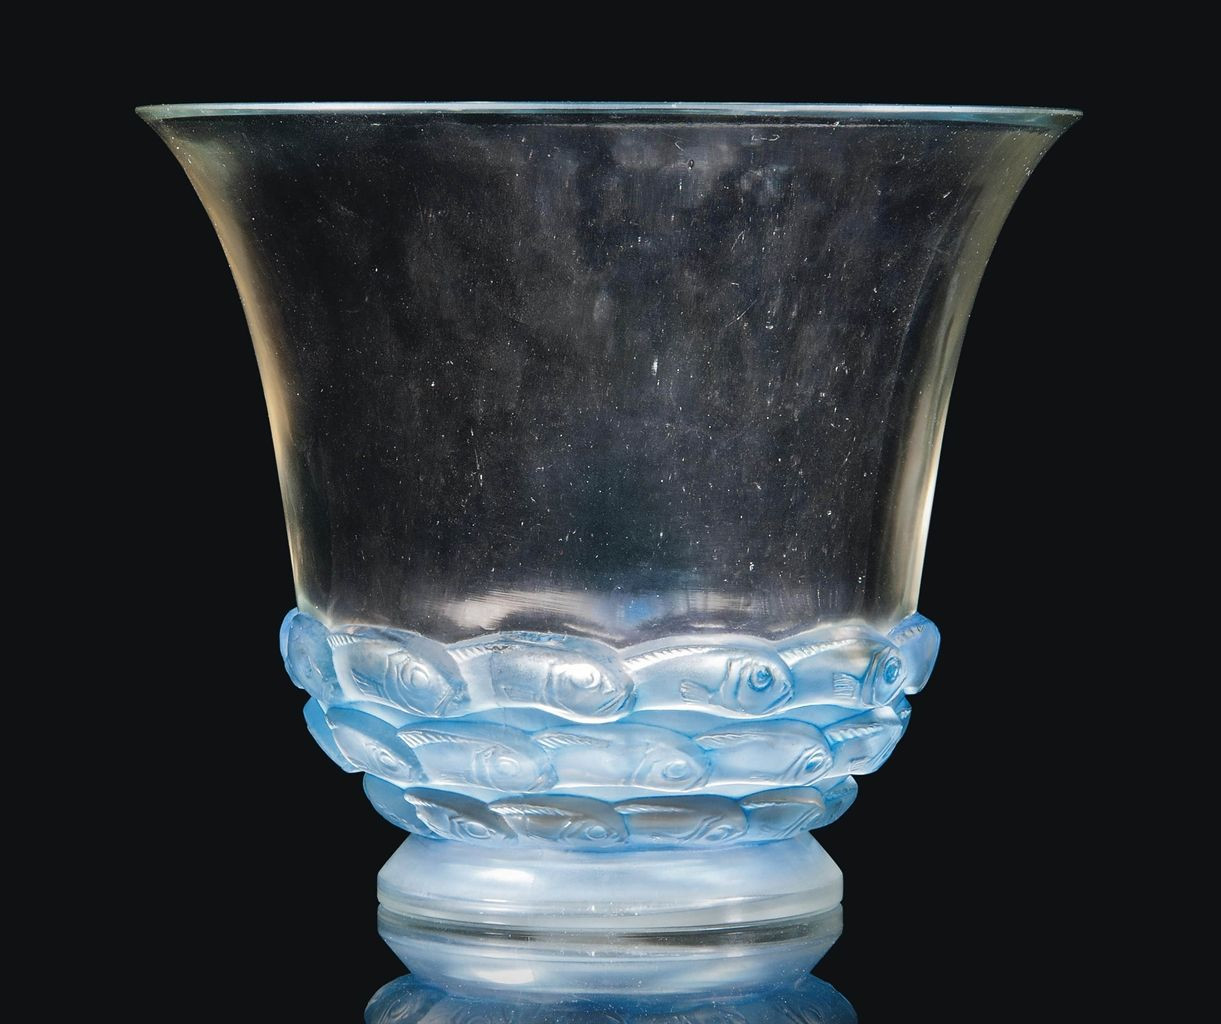 21 Stylish Clear Blue Vase 2024 free download clear blue vase of monaco vase no 1049 designed 1930 clear frosted and blue stained regarding monaco vase no 1049 designed 1930 clear frosted and blue stained stencilled